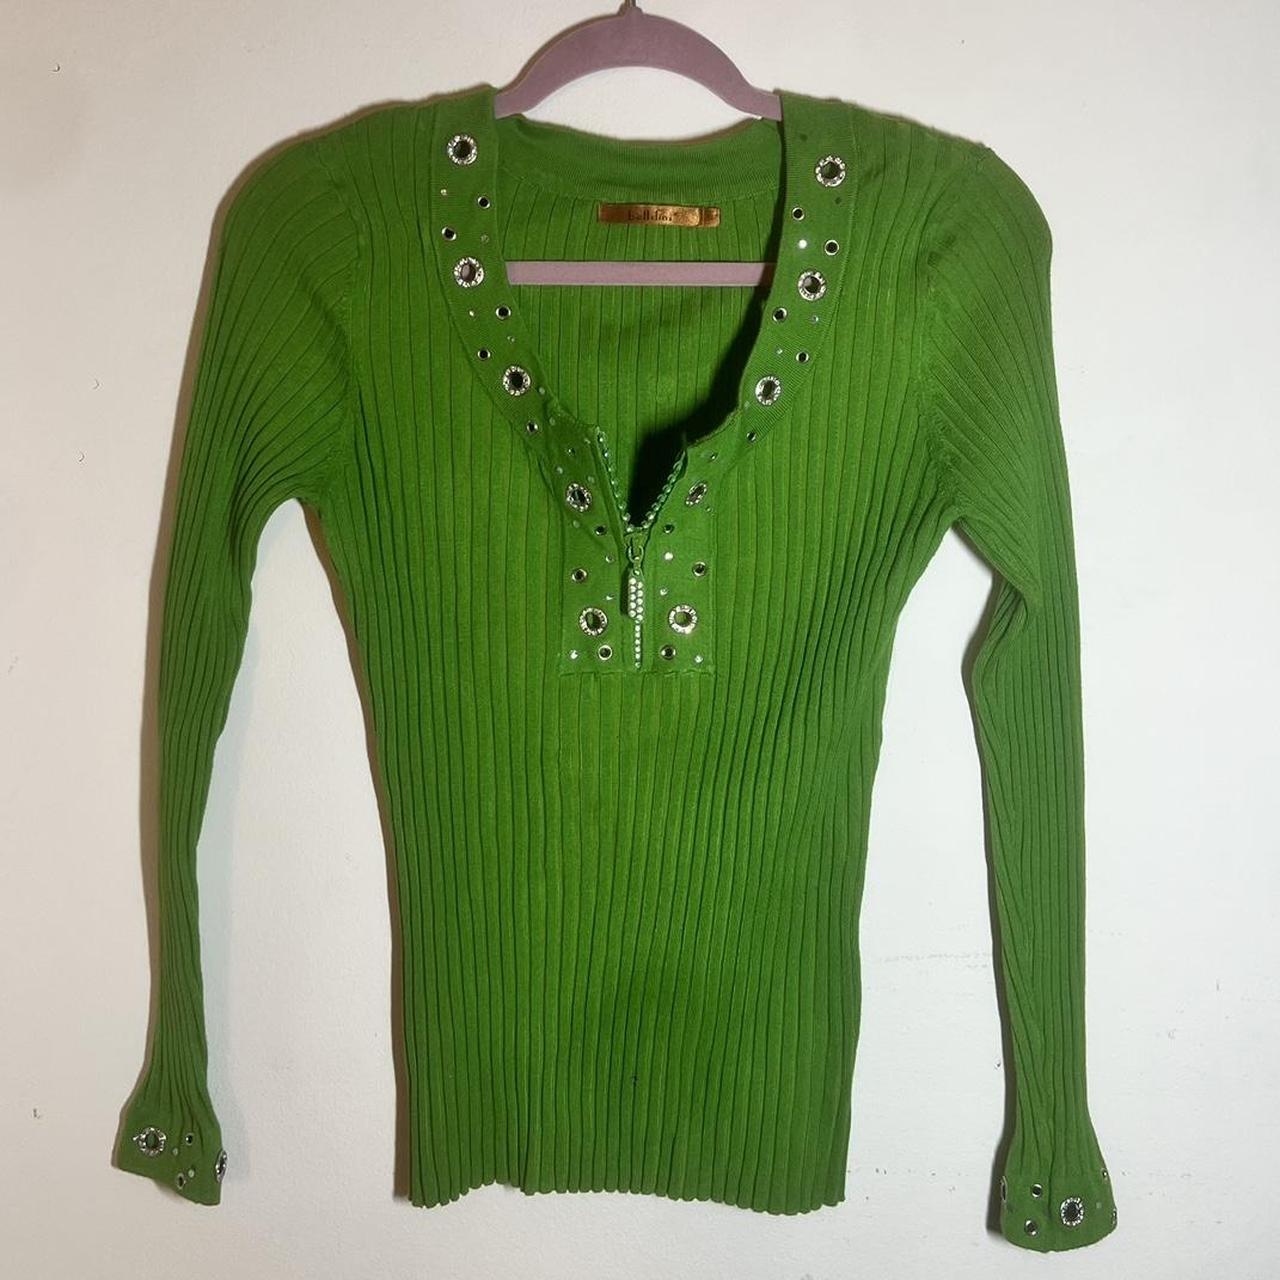 Belldini Women's Green and Silver Blouse